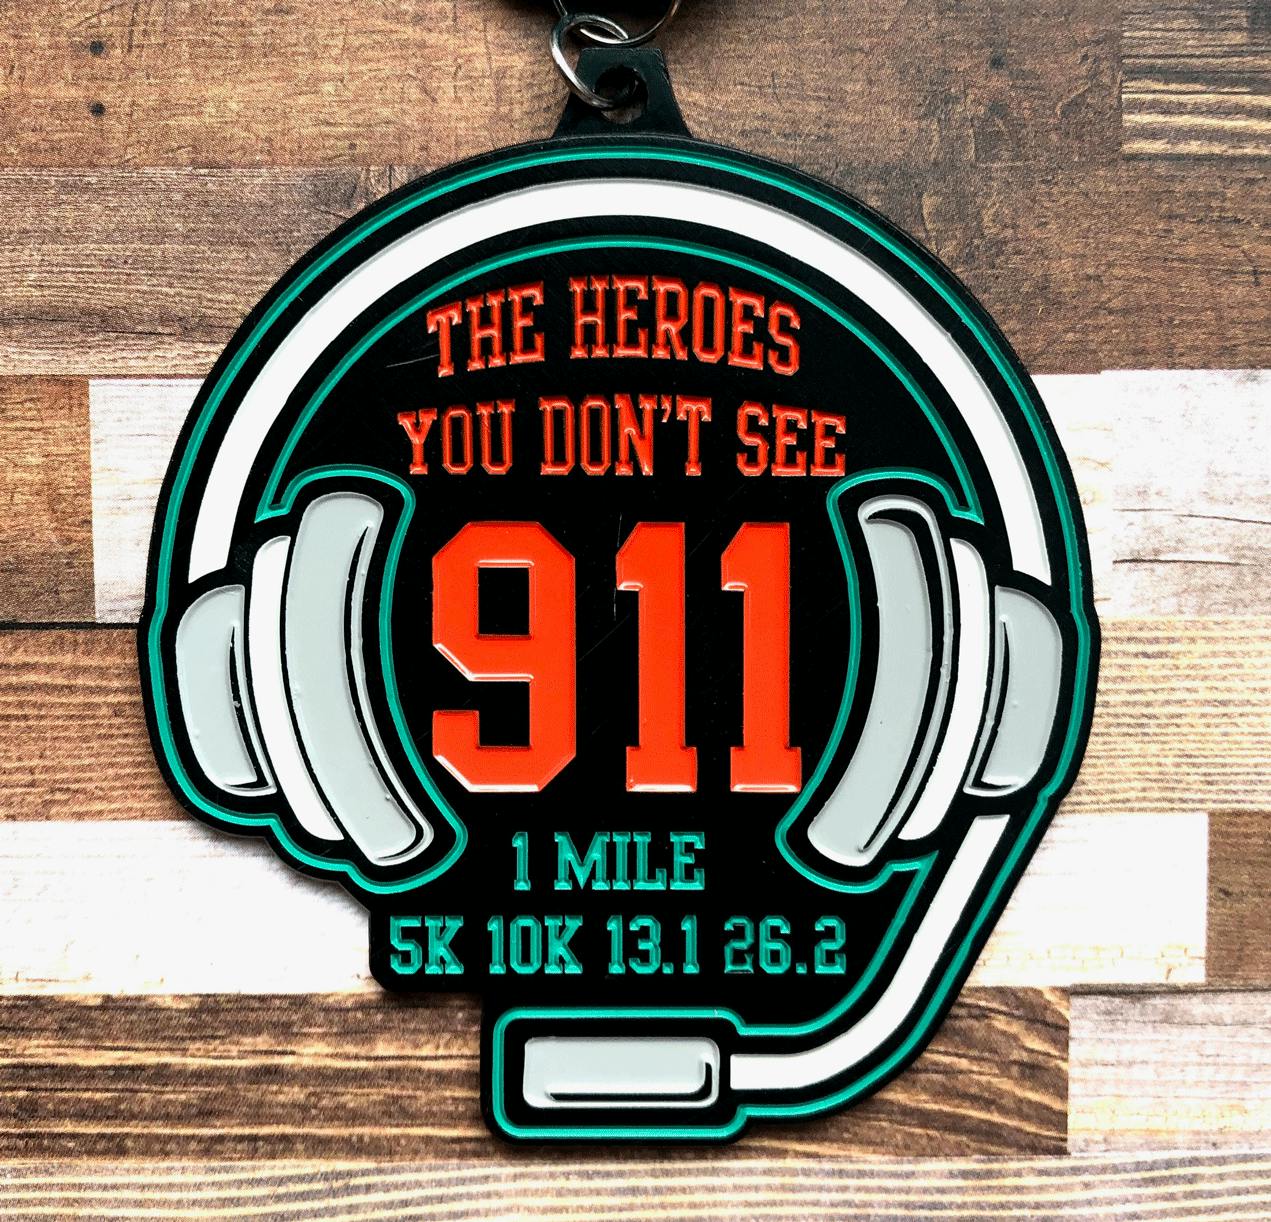 The Heroes You Don't See 1 M 5K 10K 13.1 26.2 -Allentown